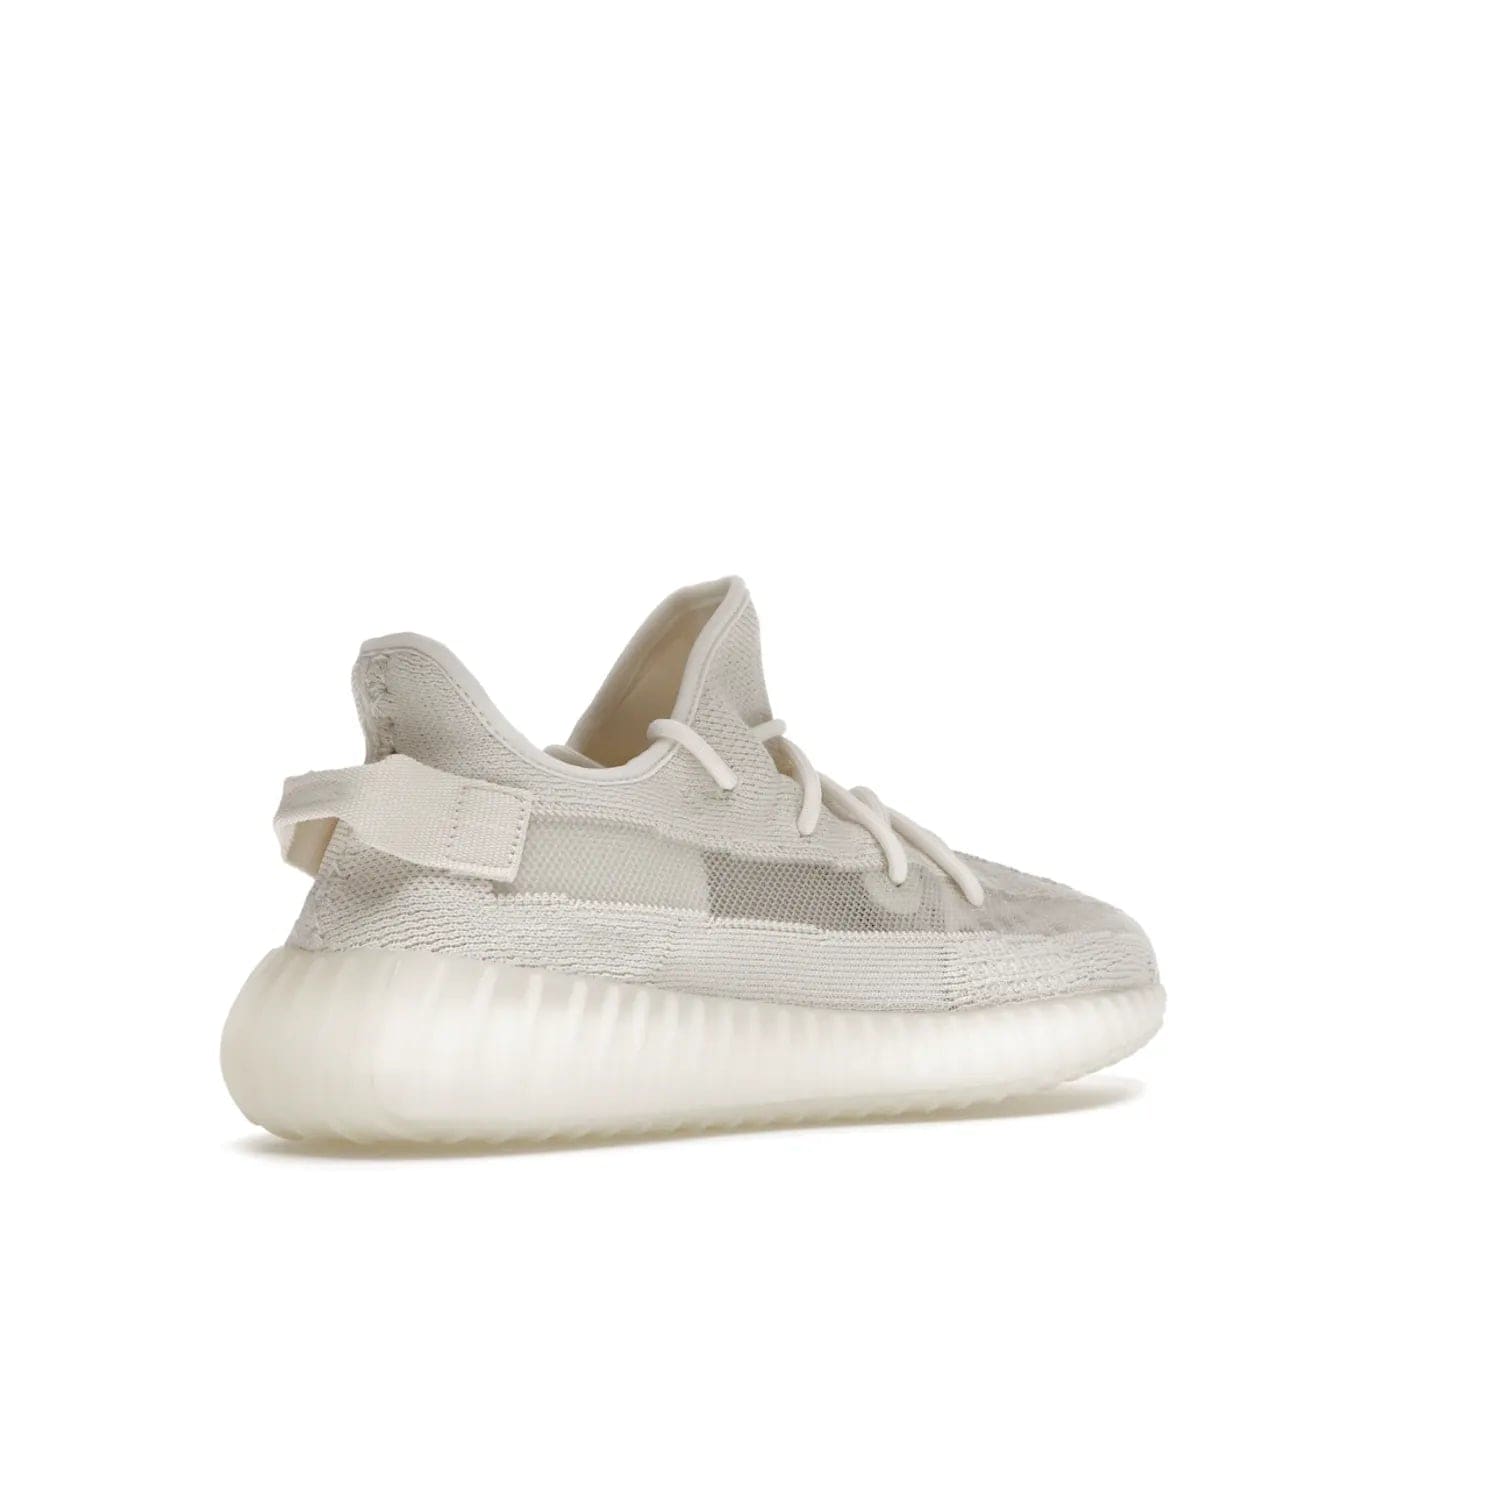 adidas Yeezy Boost 350 V2 Bone - Image 33 - Only at www.BallersClubKickz.com - Grab the stylish and comfortable adidas Yeezy Boost 350 V2 Bone in March 2022. This sneaker features a triple white Primeknit upper, mesh side stripes and canvas heel tabs, sitting atop a semi-translucent sole with Boost technology. Sure to keep your feet comfortable and stylish!